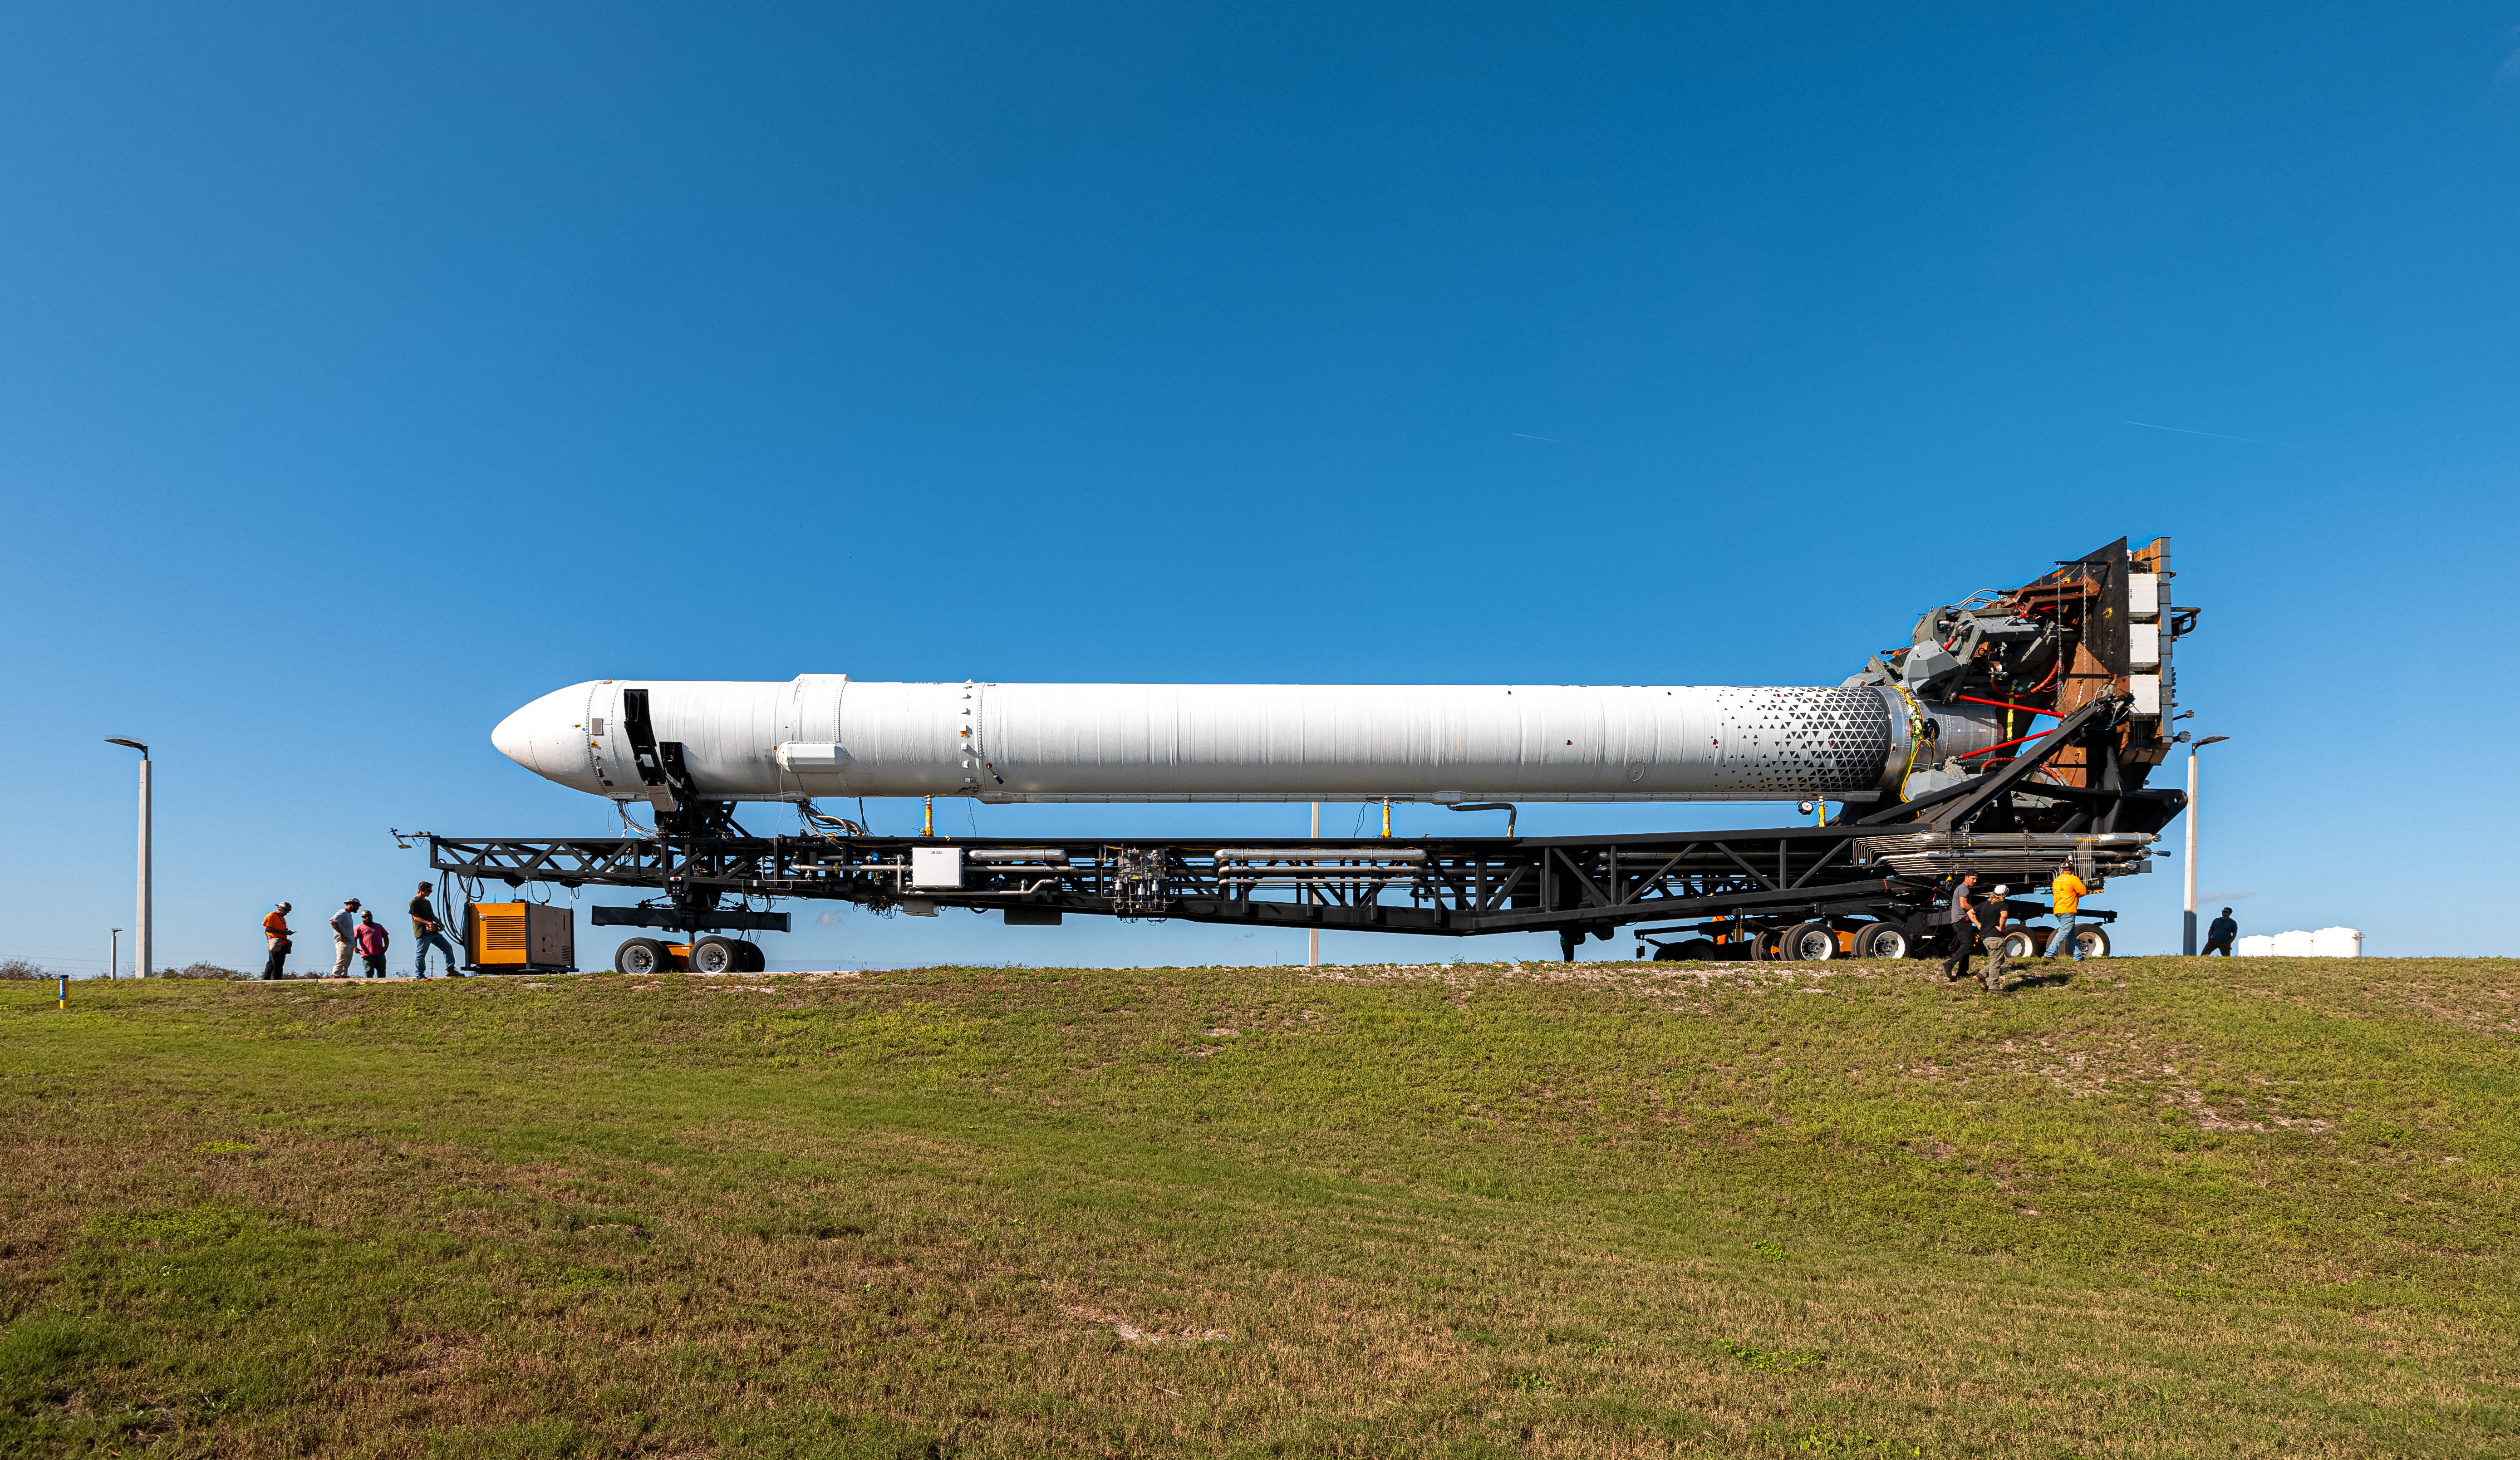 Relativity Space's 3D-printed rocket Terran 1 is role to launch pad at Cape Canaveral Air Force Station in Florida